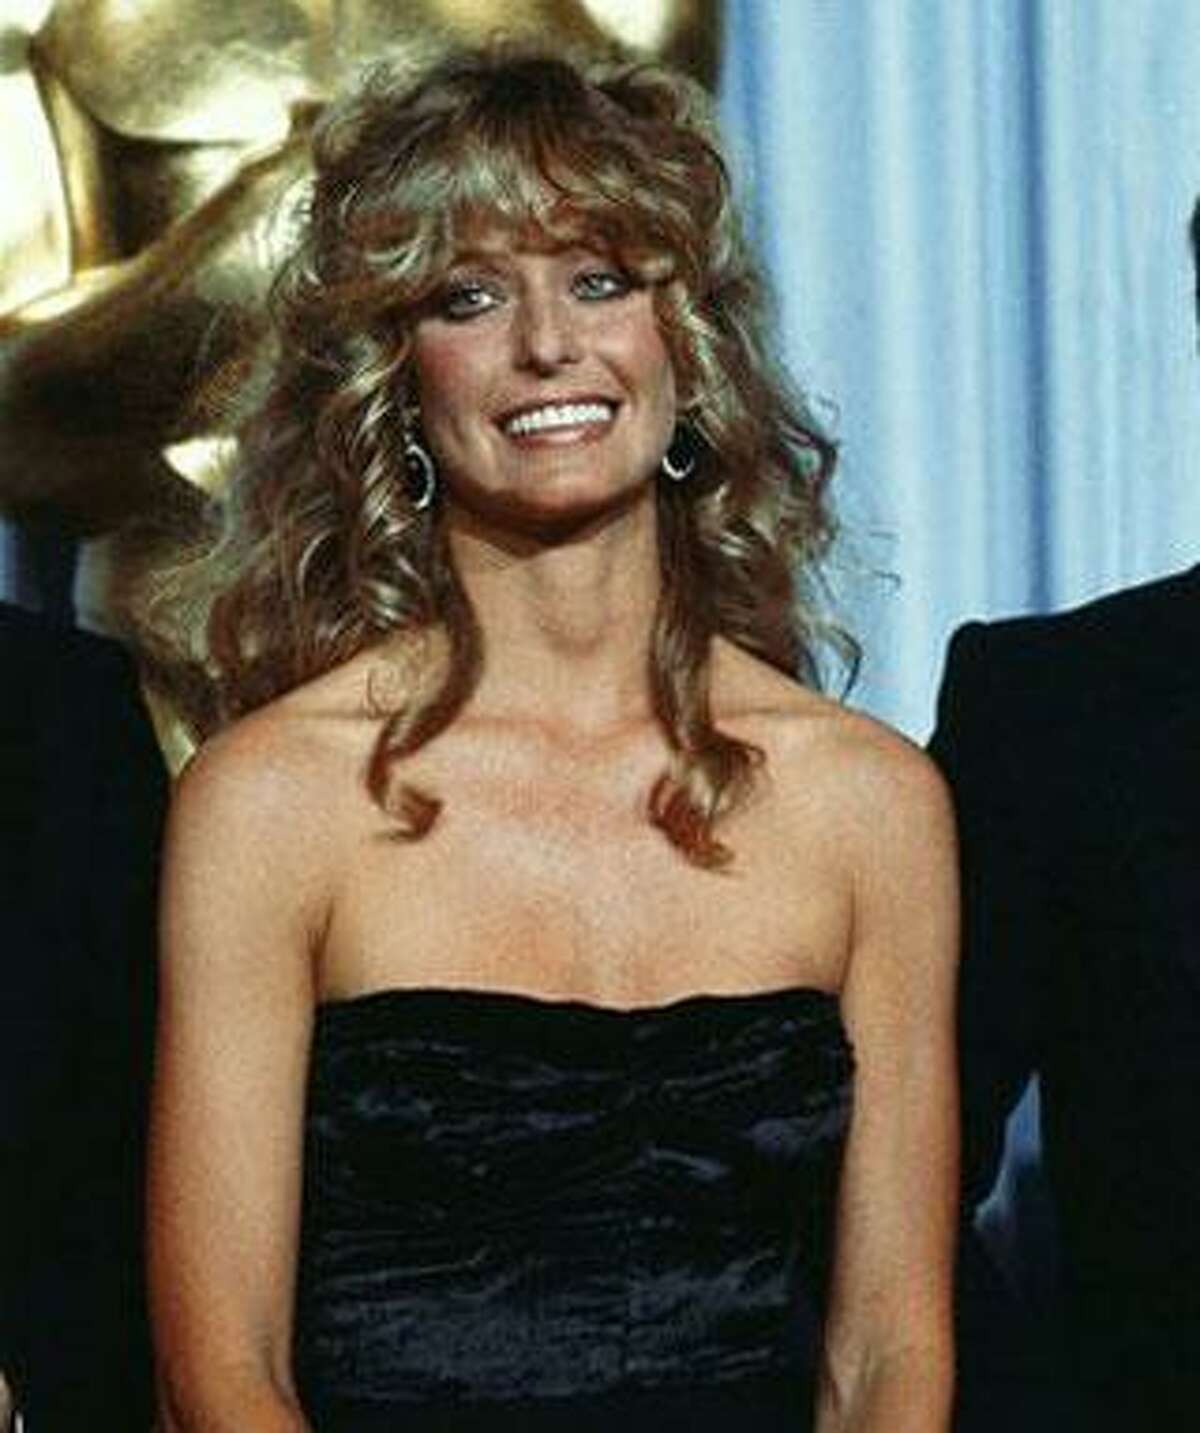 In this April 14, 1980 file photo, actress Farrah Fawcett-Majors is shown at Academy Awards Presentations in Los Angeles.Fawcett died Thursday, June 25, 2009 in a Los Angeles hospital. She was 62. (AP Photo/Reed Saxon, file)